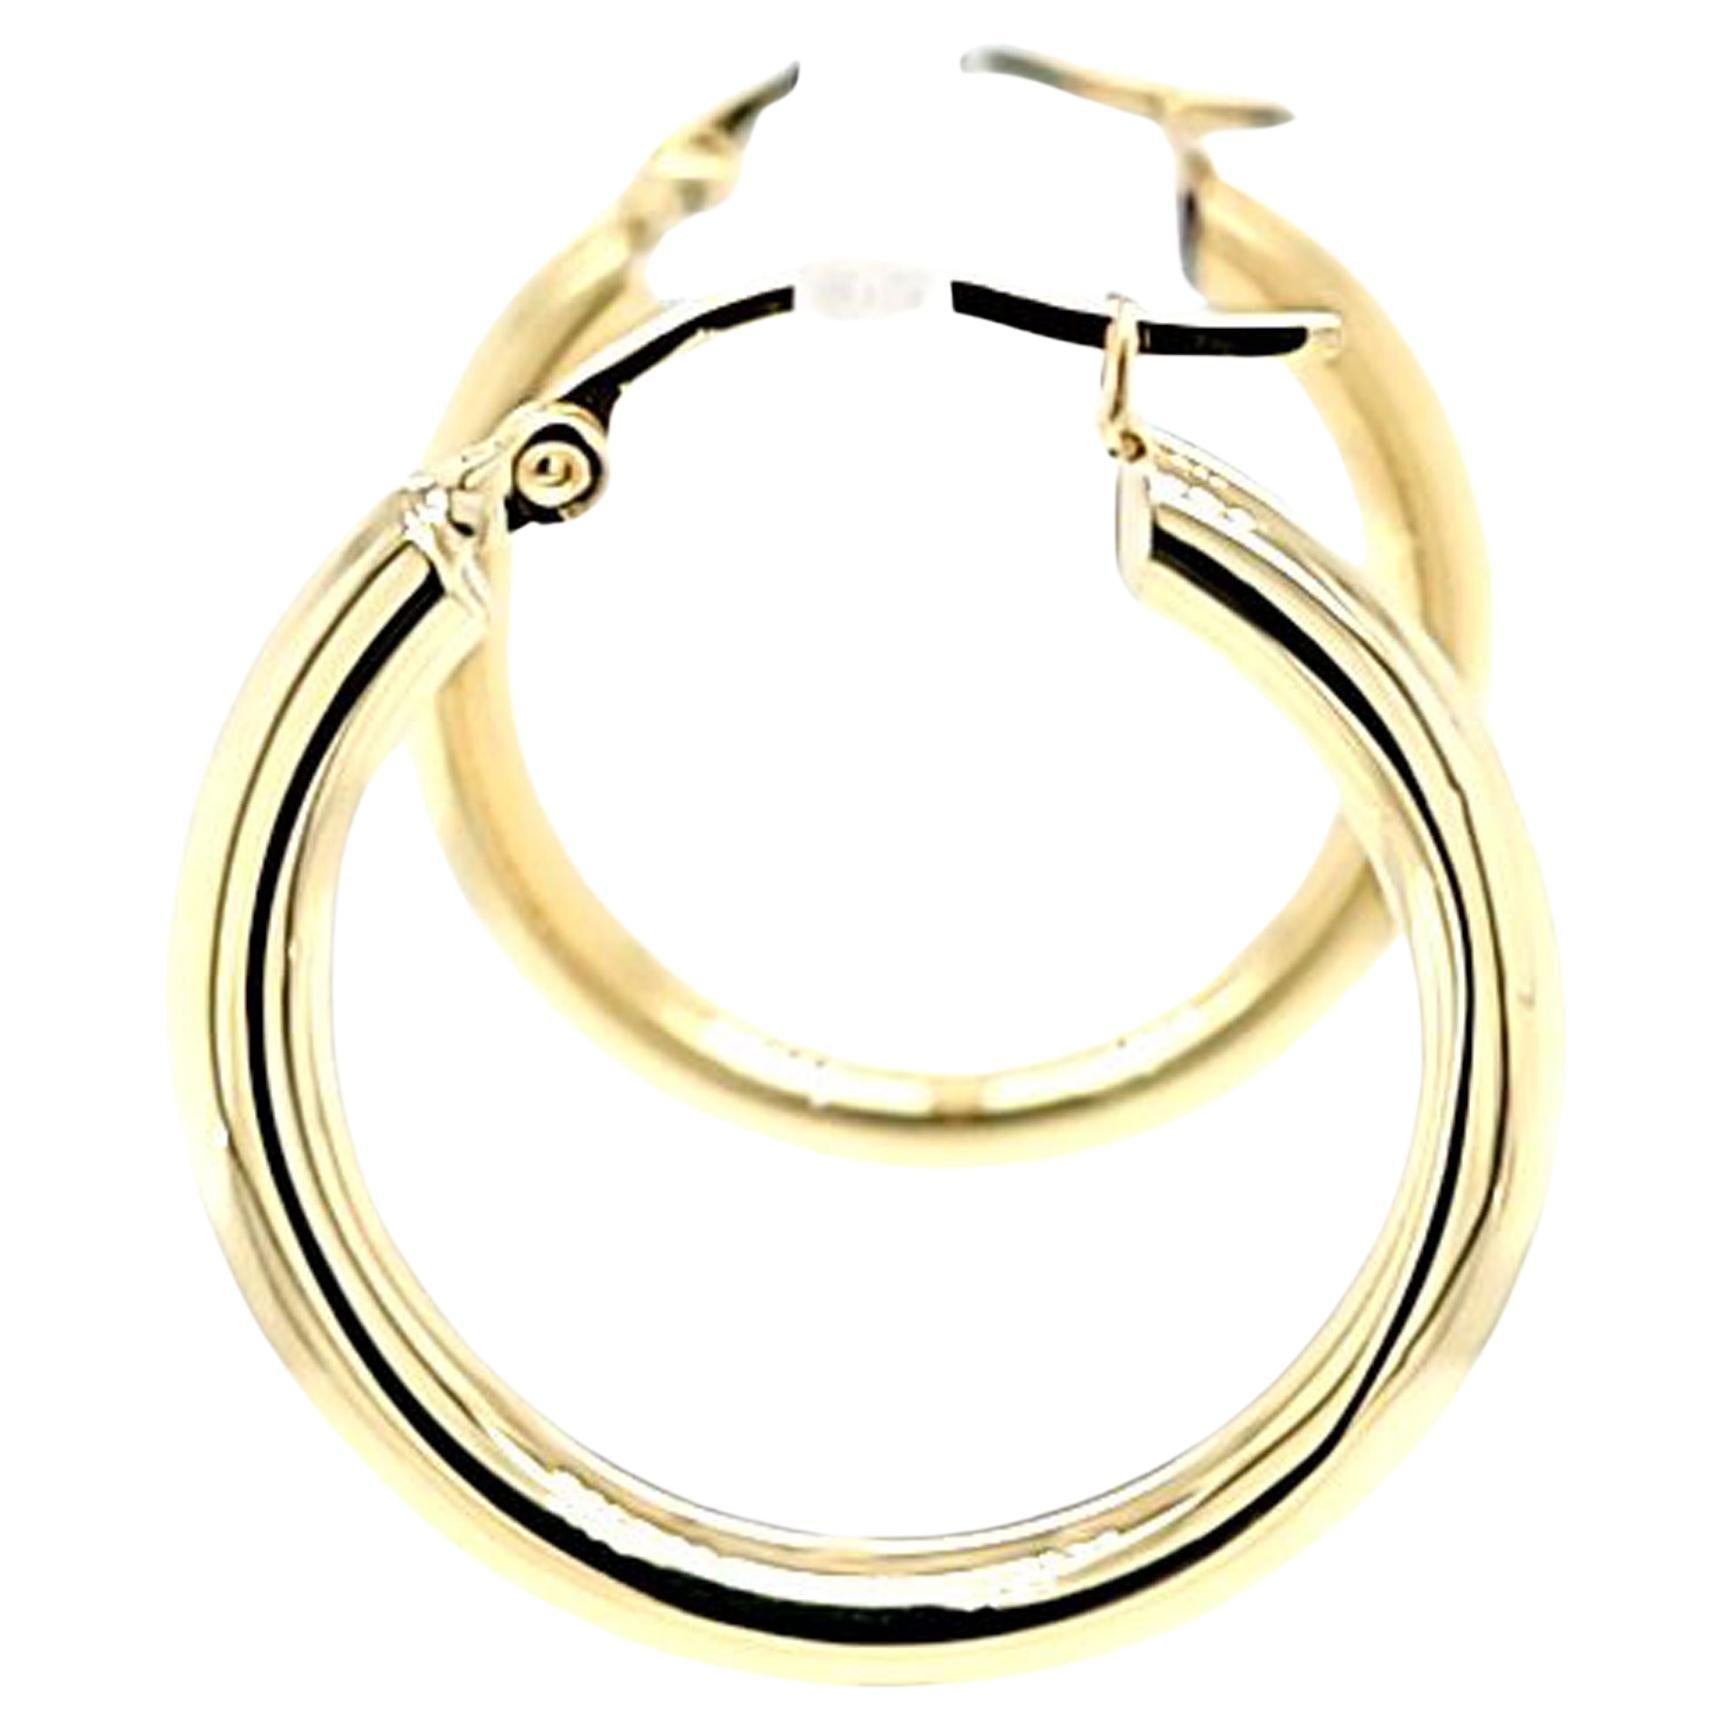 3mm Yellow Gold Hoops